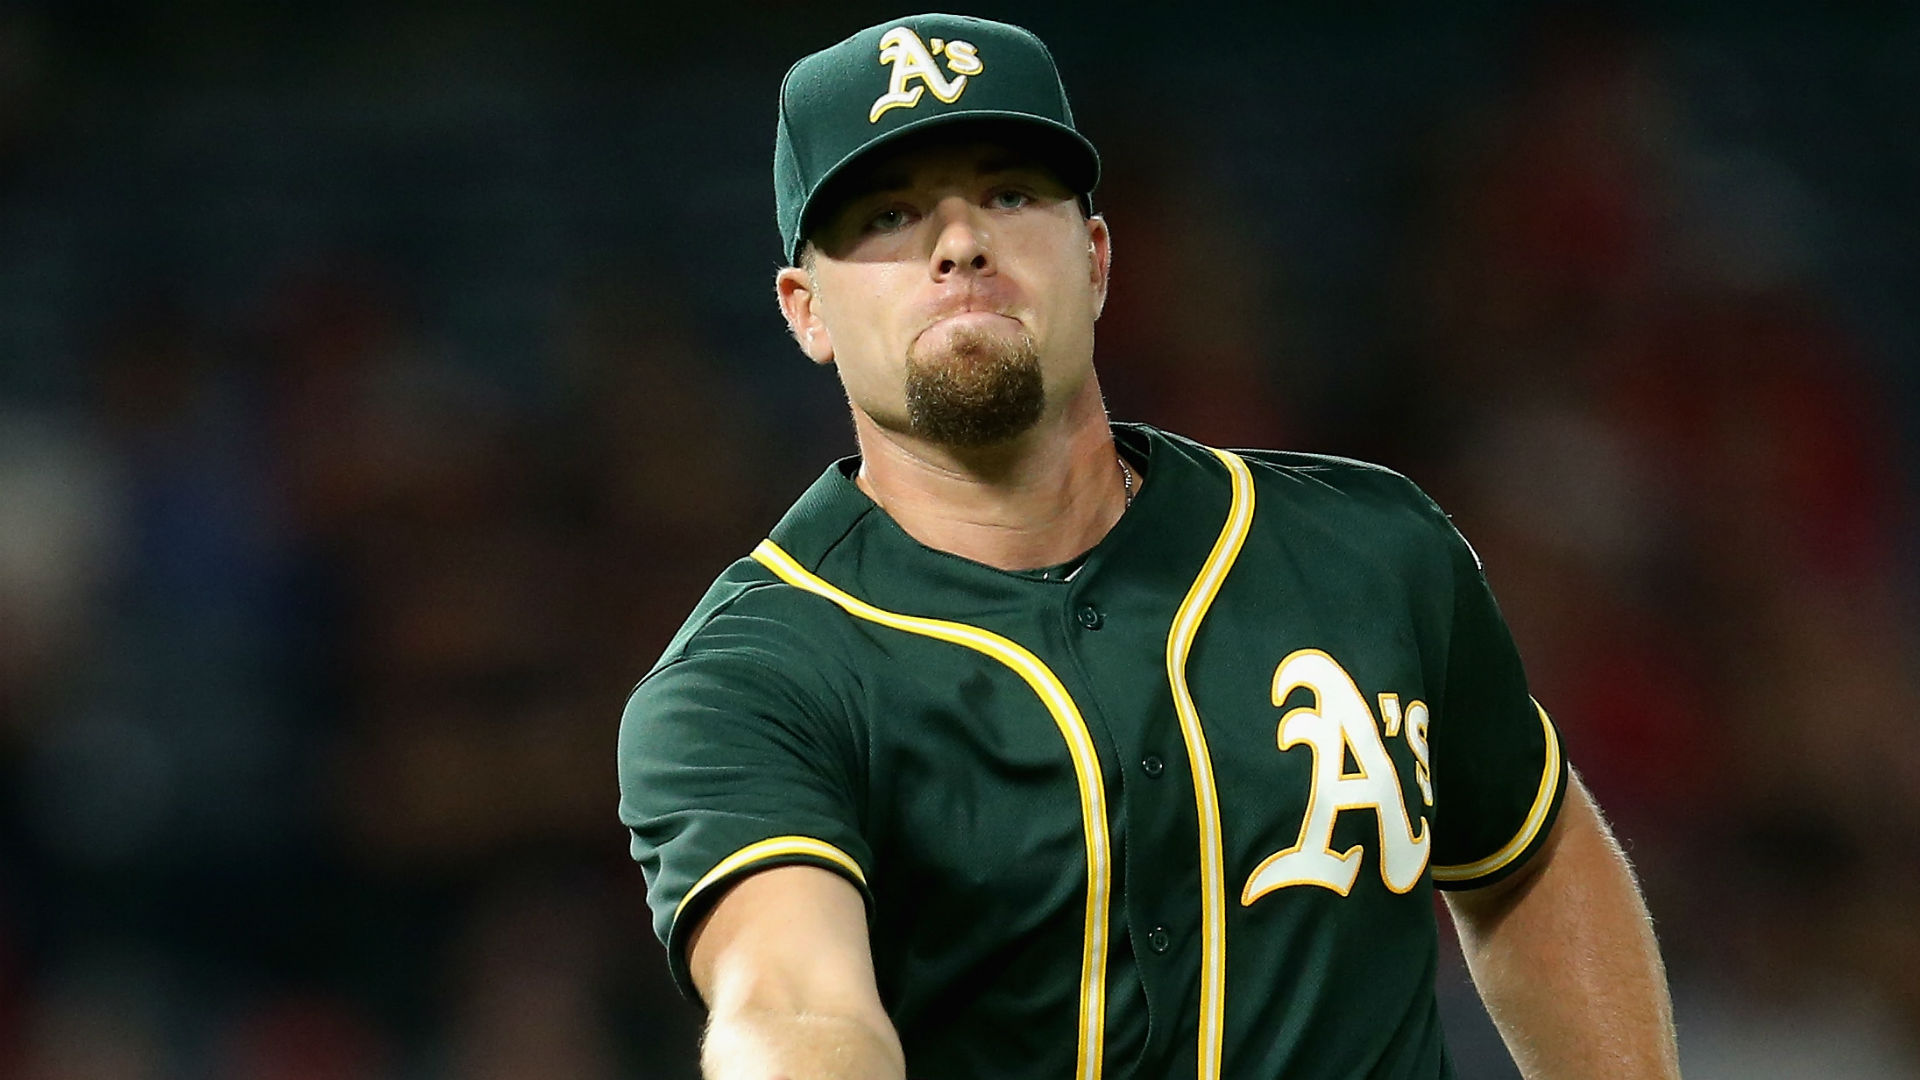 Blake Treinen has not replicated his 2018 success, but his loss is certainly a tough one for the Athletics.